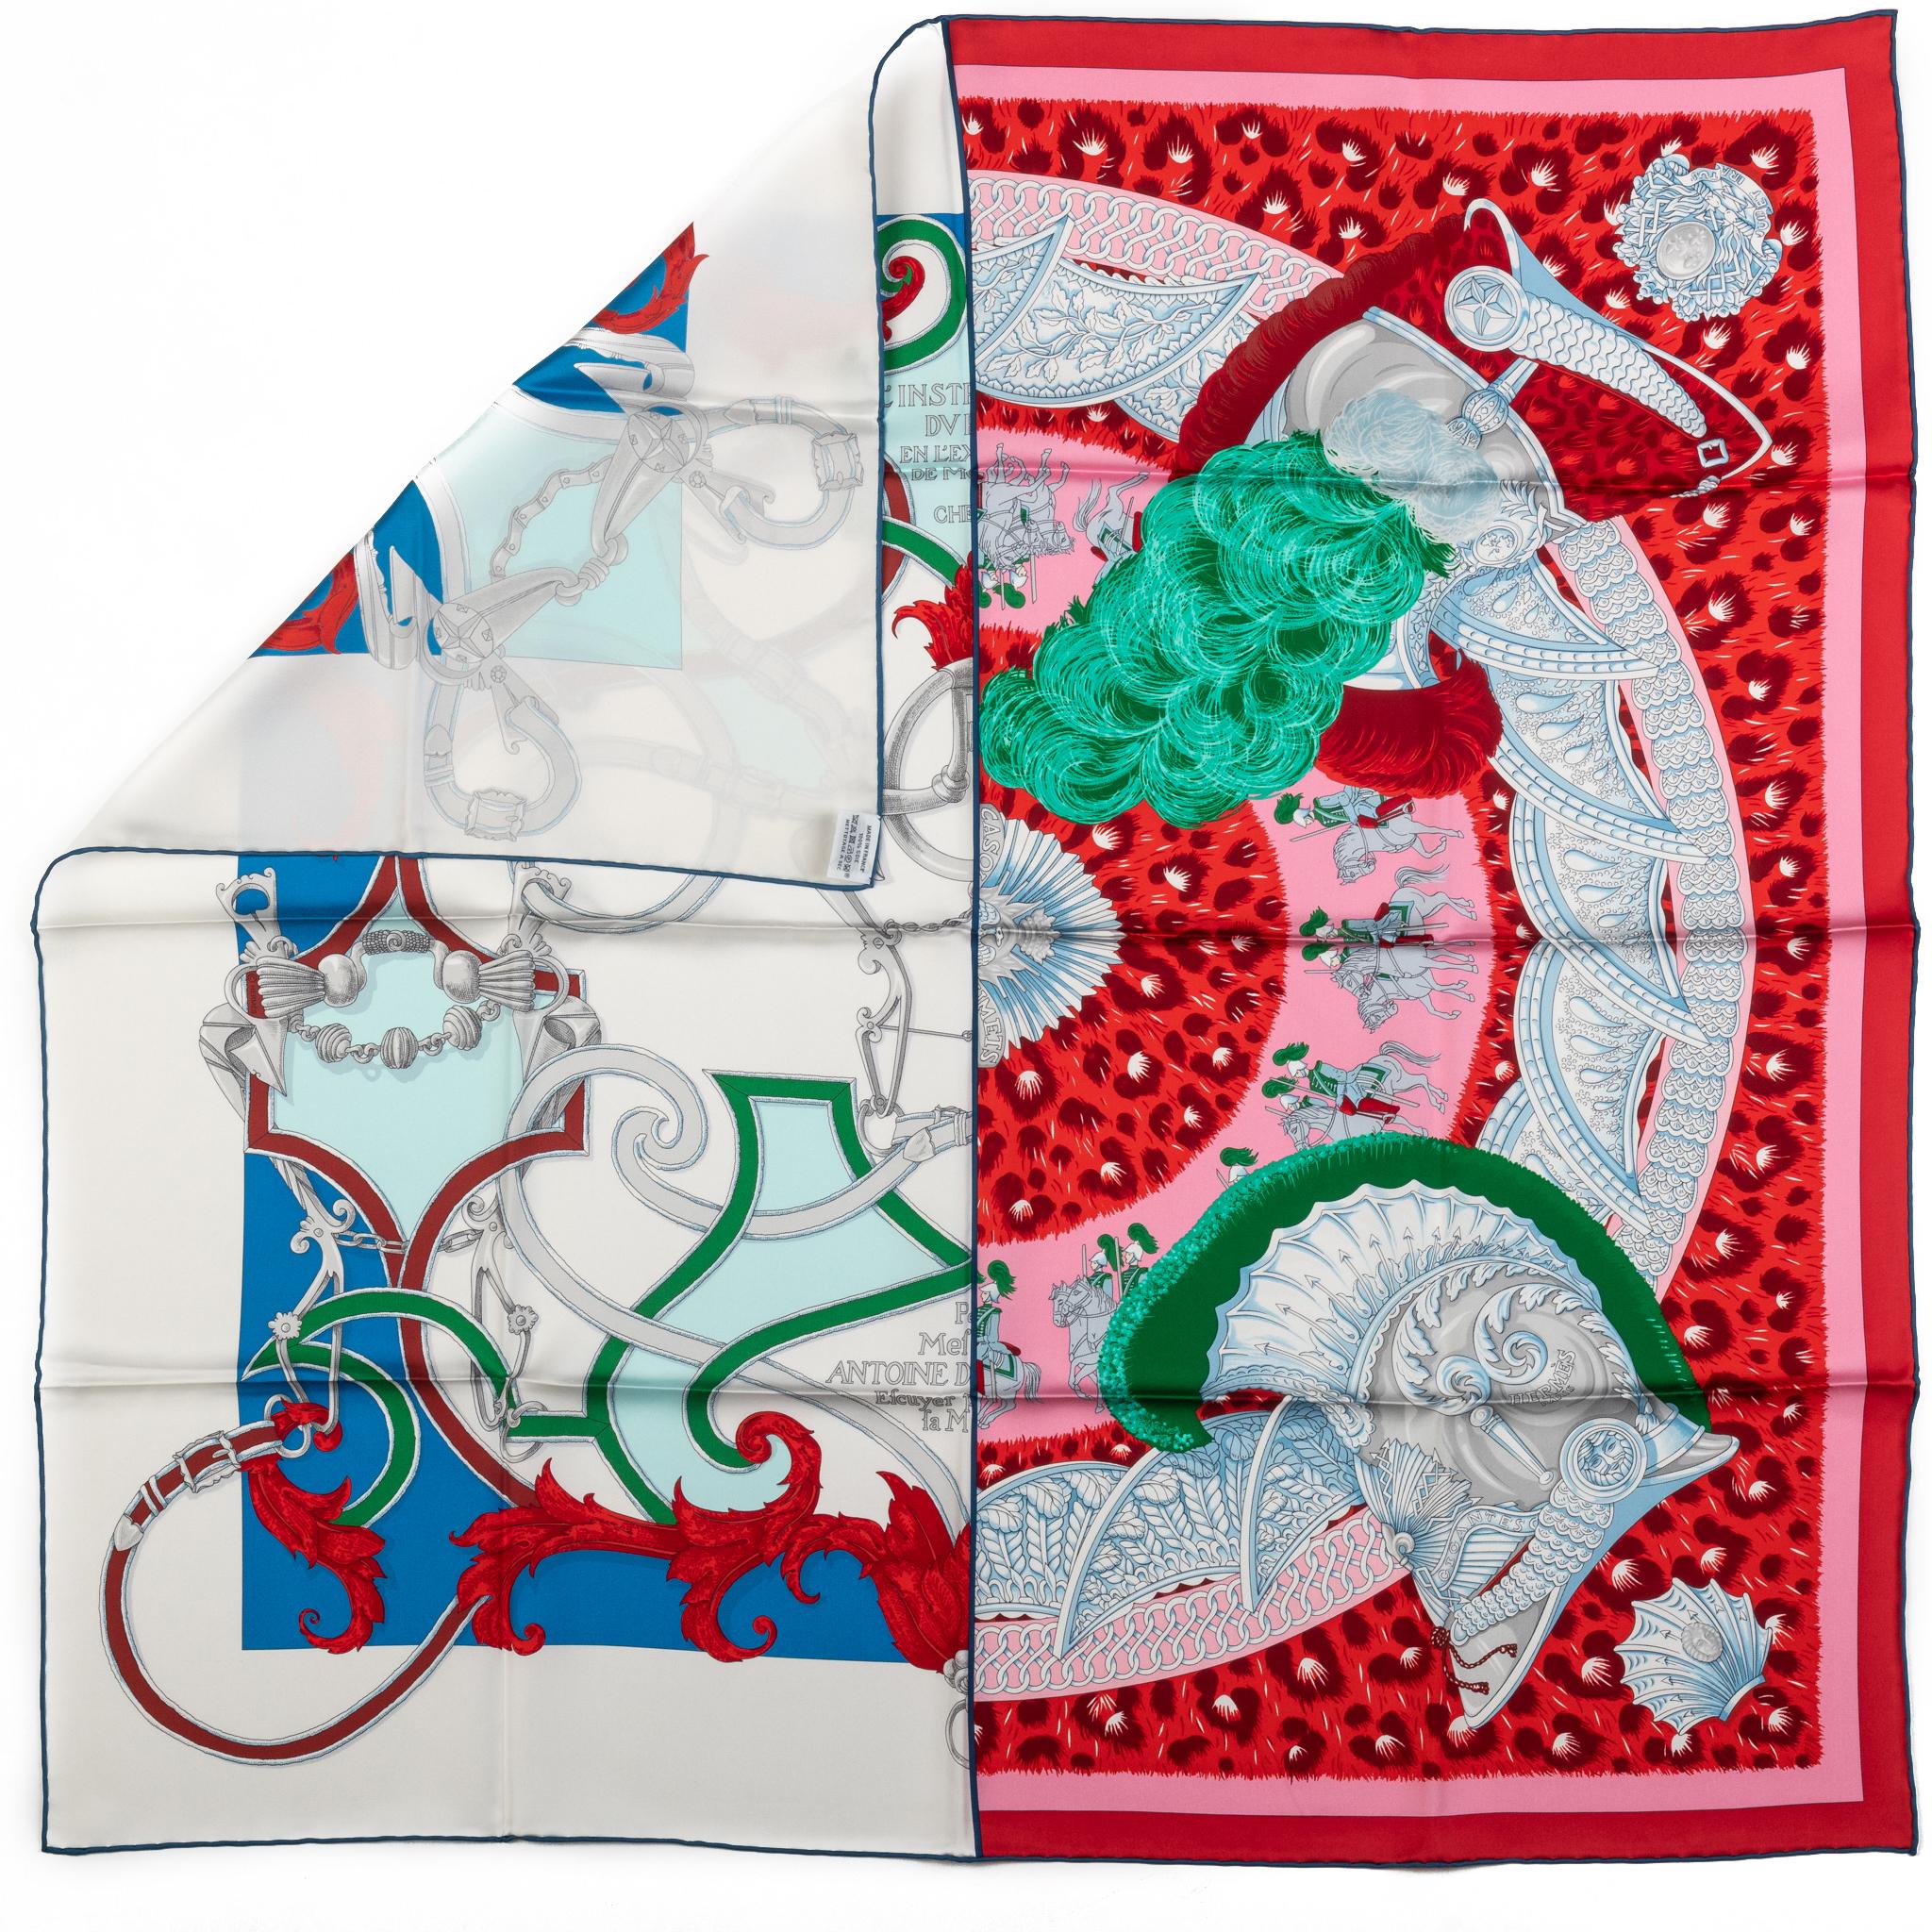 Hermes collectible patchwork silk scarf in red and white. Hand rolled edges. No box included.